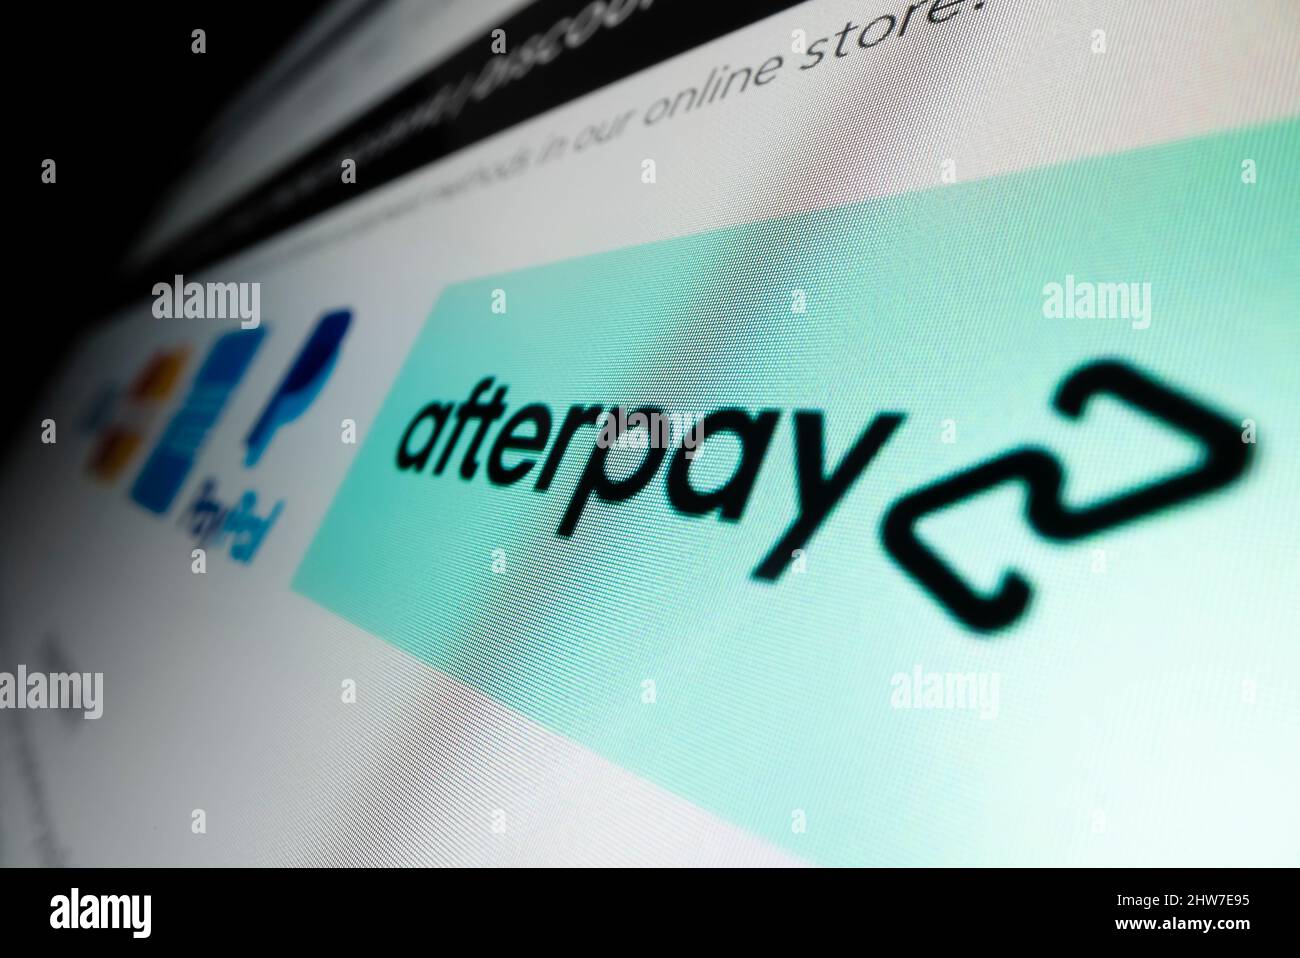 Melbourne, Australia - May 31, 2021: Motorized moving shot of Afterpay logo on its website Stock Photo